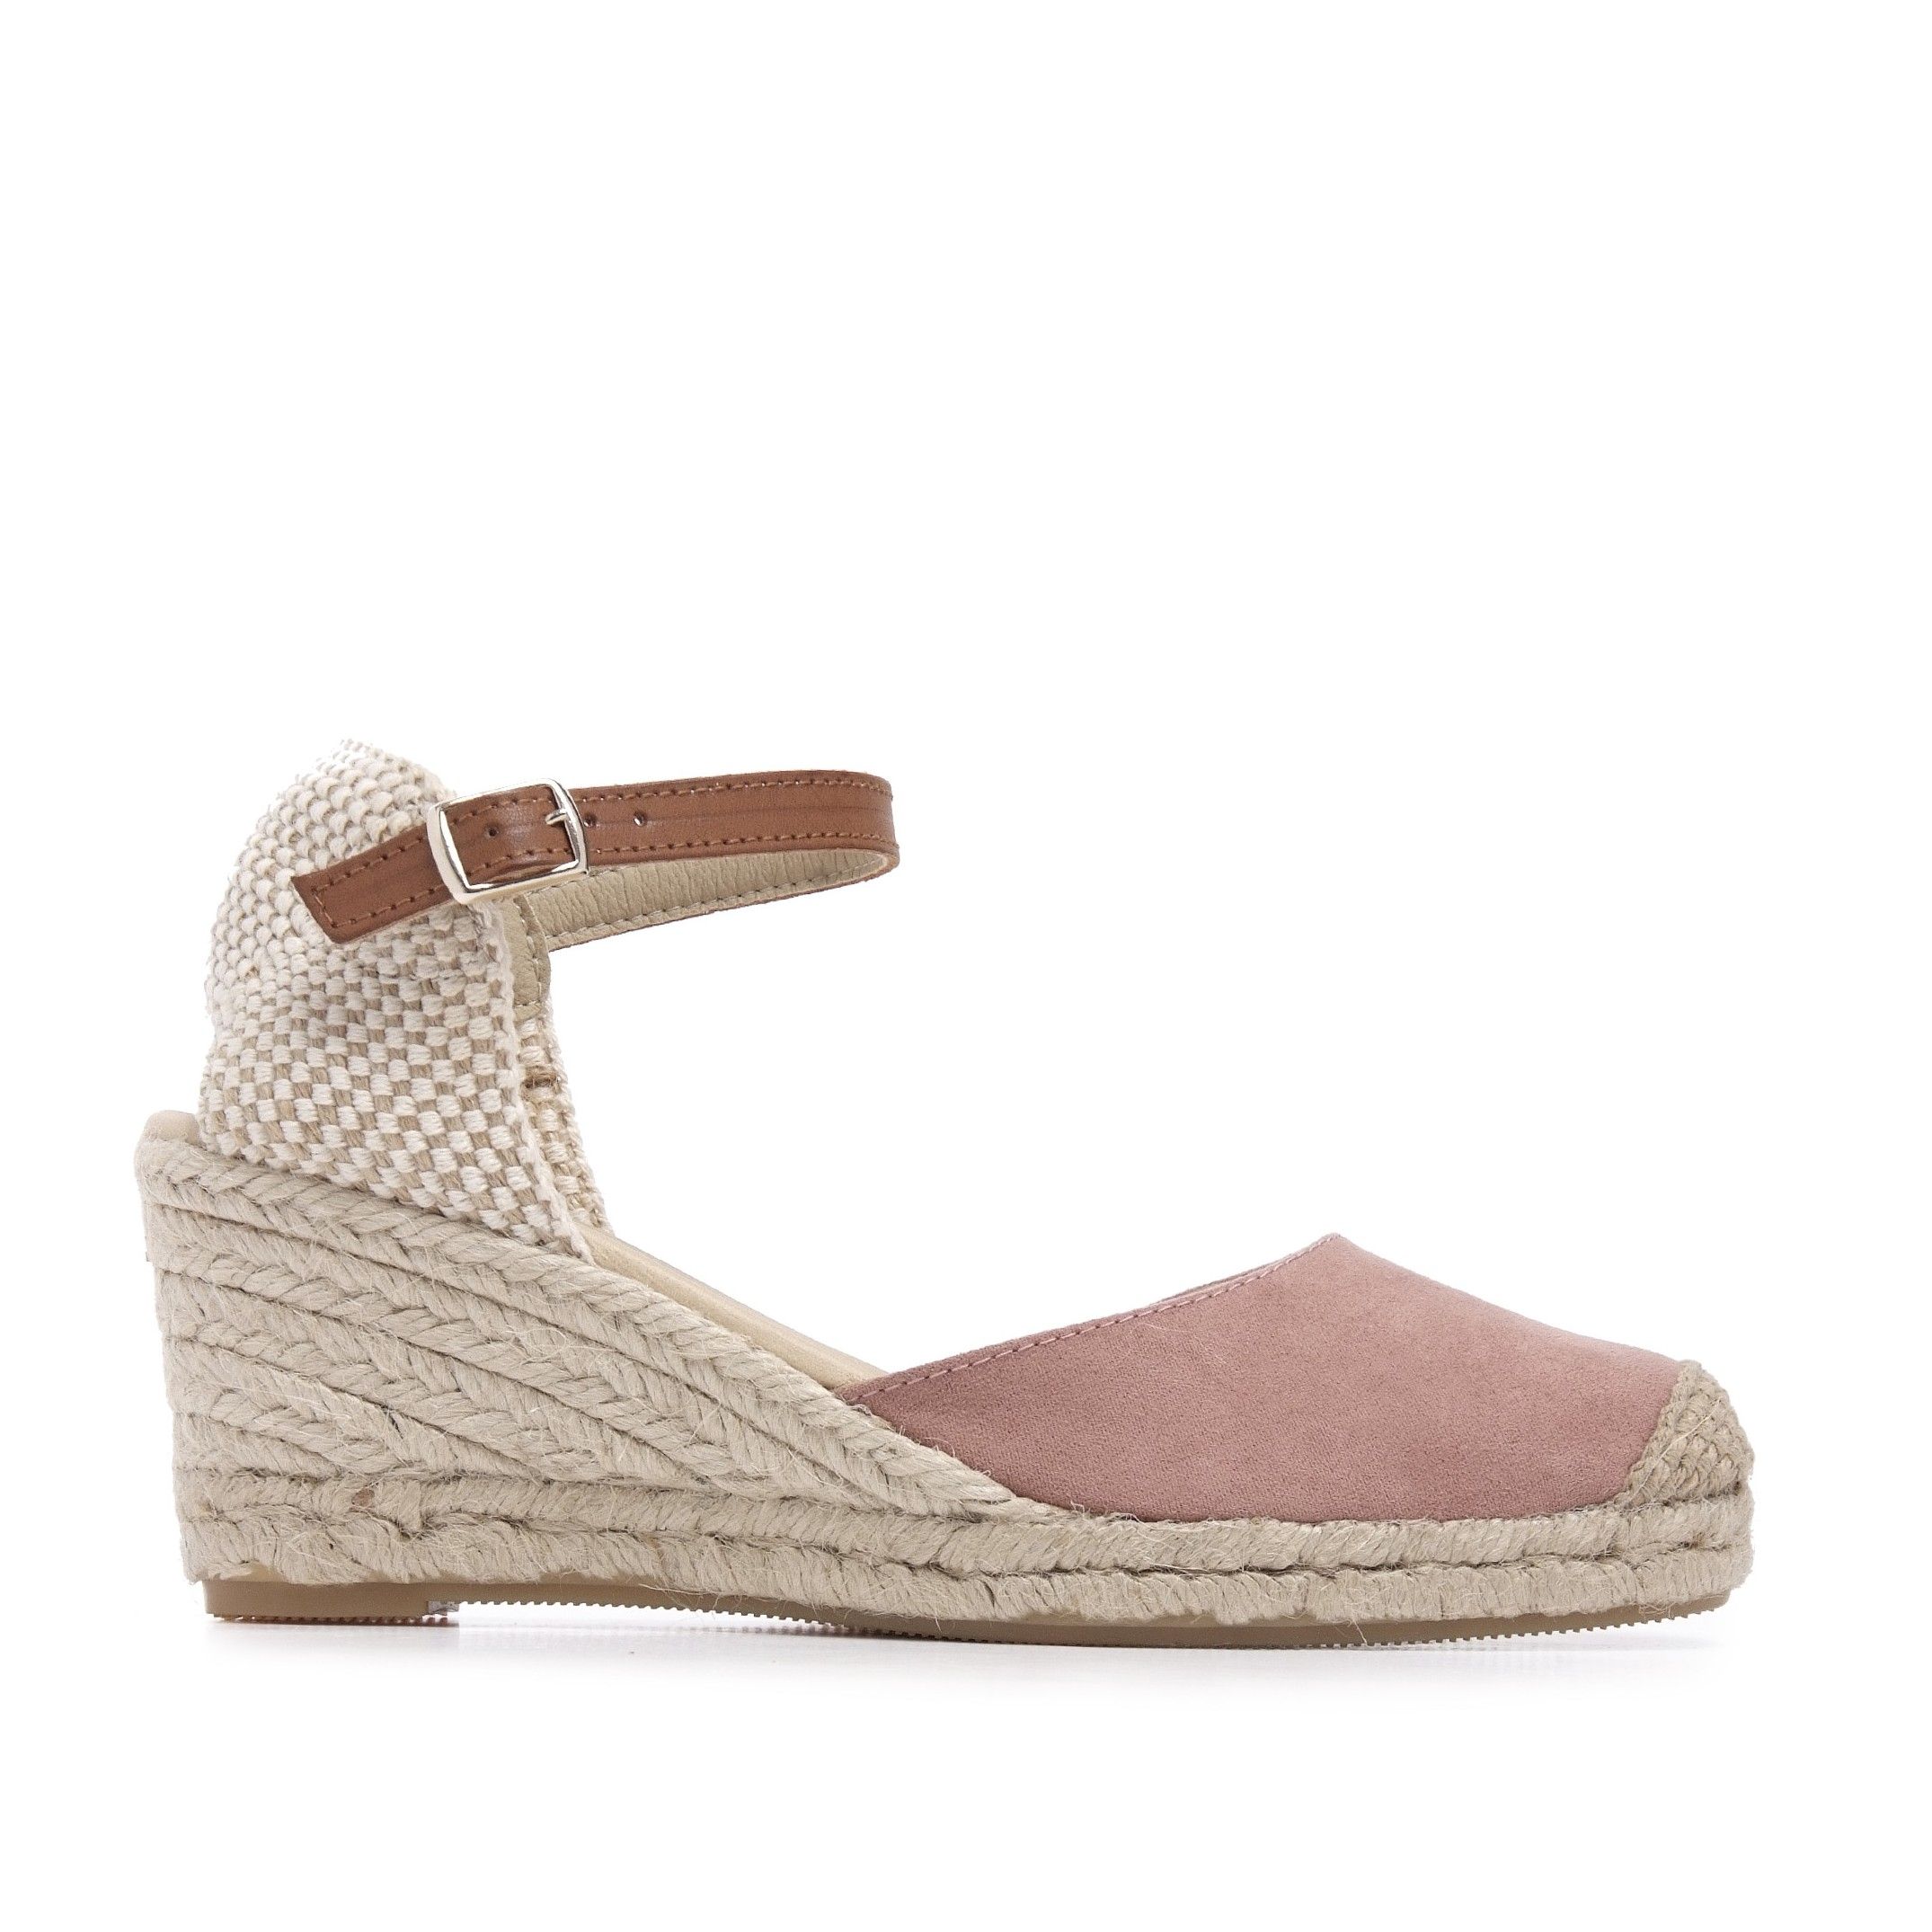 Jute and leather high wedge with classic toe. Closure: metallic buckle at ankle height. Upper: leather and tissue. Insole: gel lined in leather. Wedge: 7 cm of jute. Platform: 2 cm. Sole:Non-skid rubber. MADE IN SPAIN.